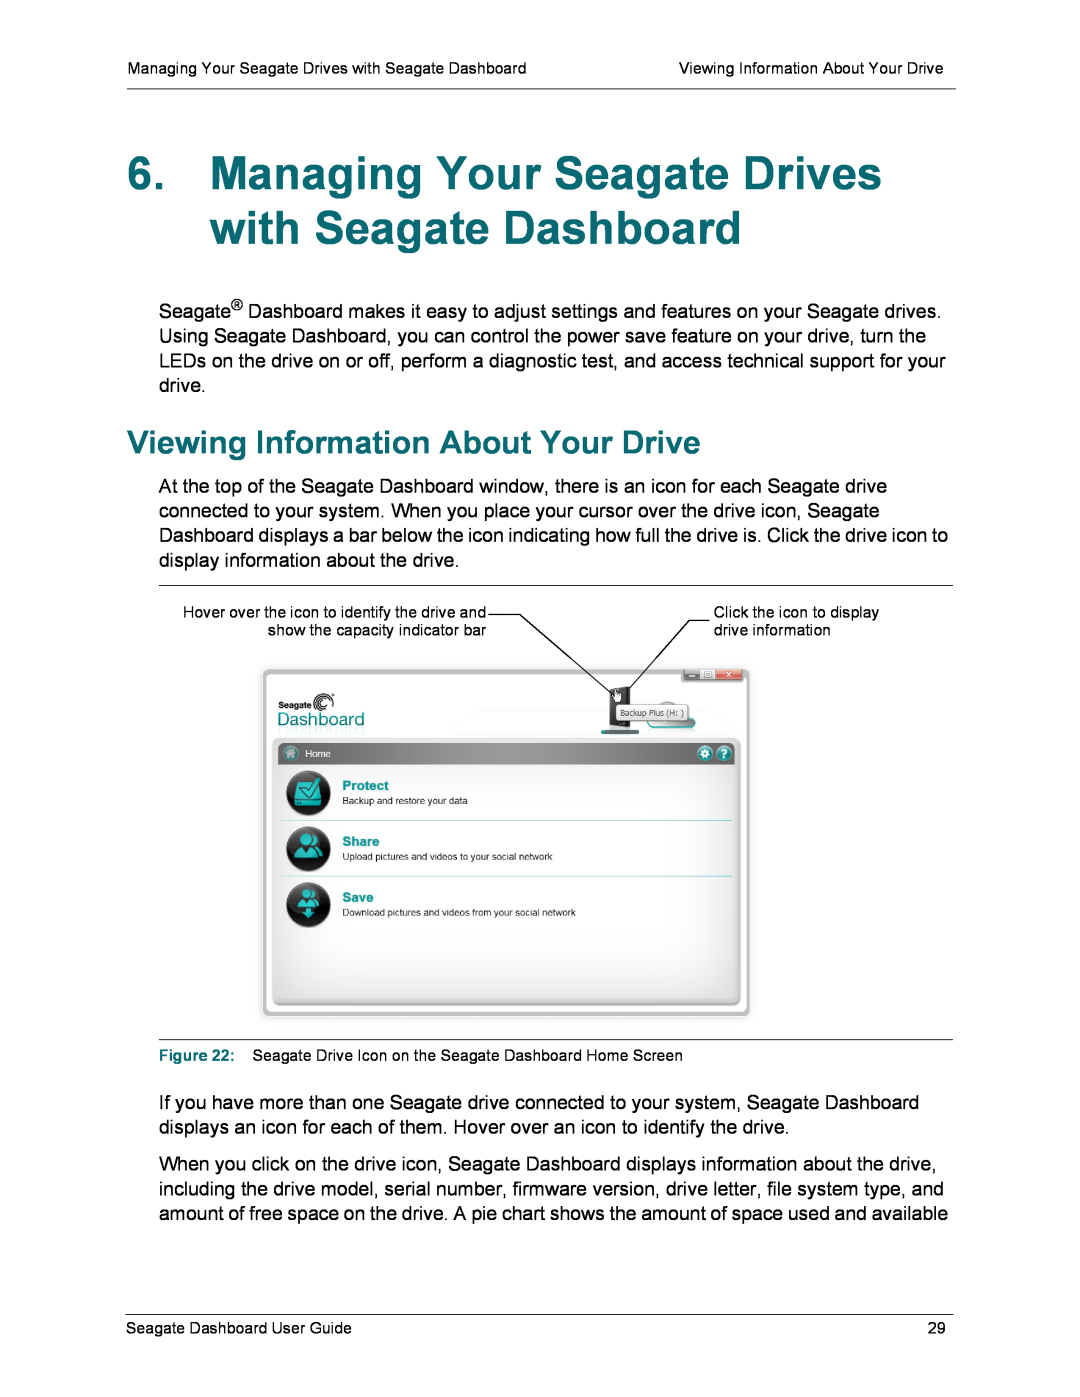 Seagate STBU500102, STCB4000102 Managing Your Seagate Drives with Seagate Dashboard, Viewing Information About Your Drive 